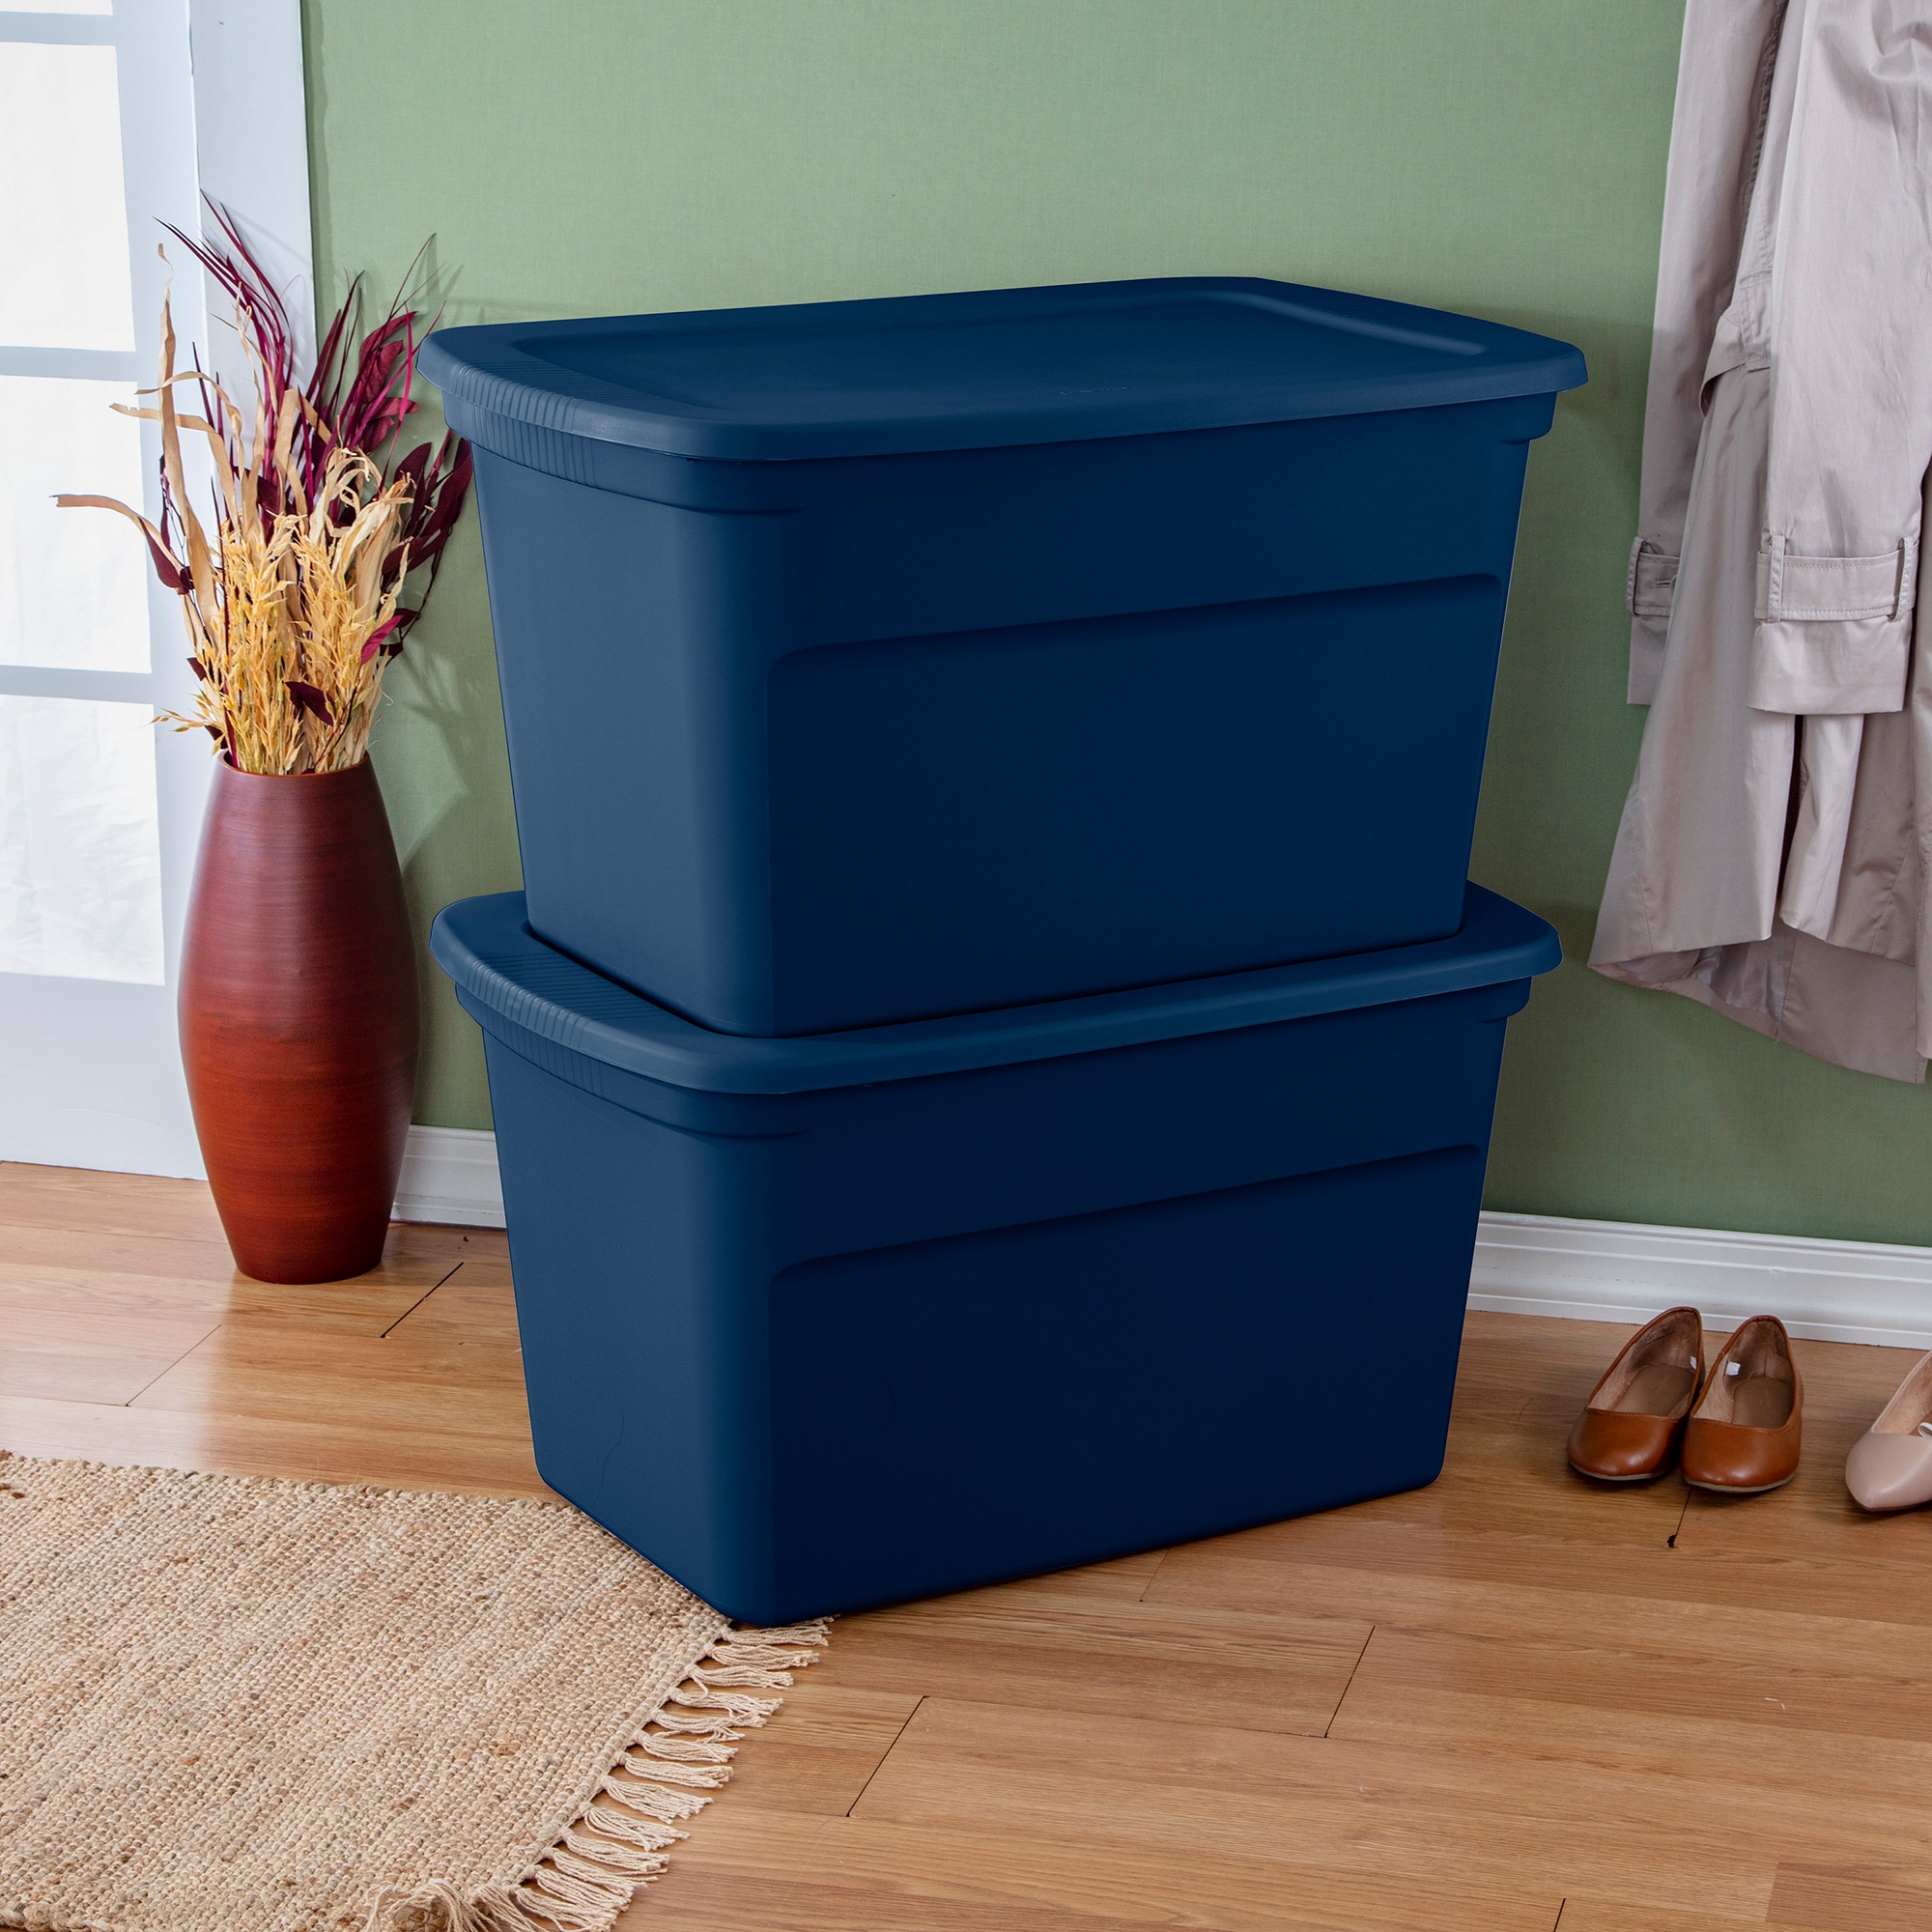 4 Pack Plastic Storage Containers Box 30 Gal Stackable Organizer